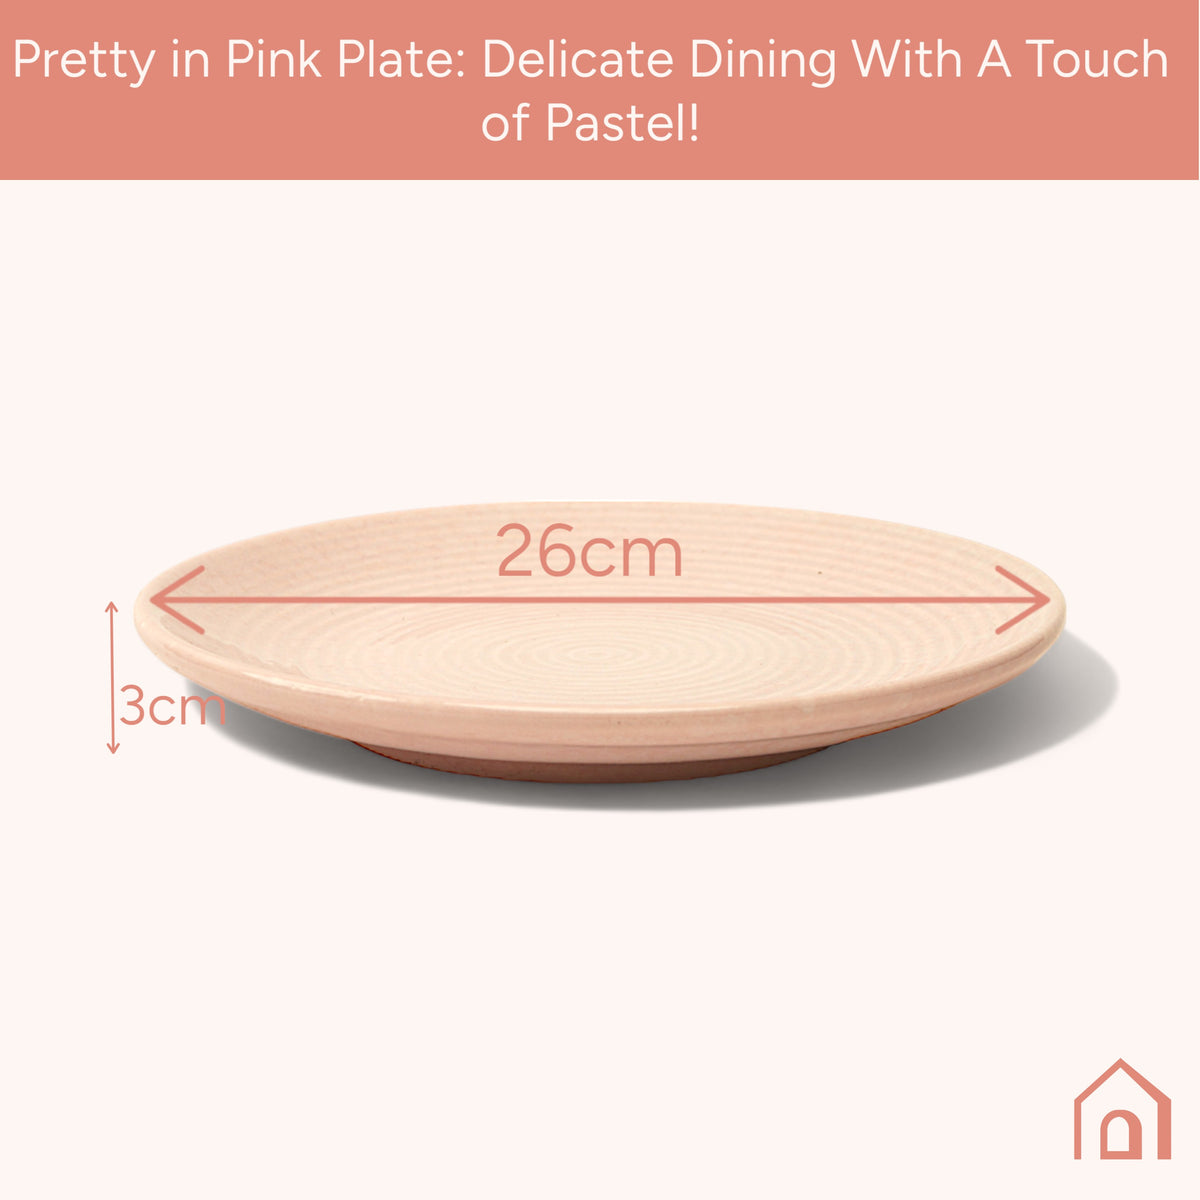 Claymistry Ceramic Dinner & Snacks Rose with Ridges Plate, | Glossy Finish | Dishwasher, Oven & Microwave Safe | Dinnerware Serving Plate Thali | Premium Kitchen Crockery